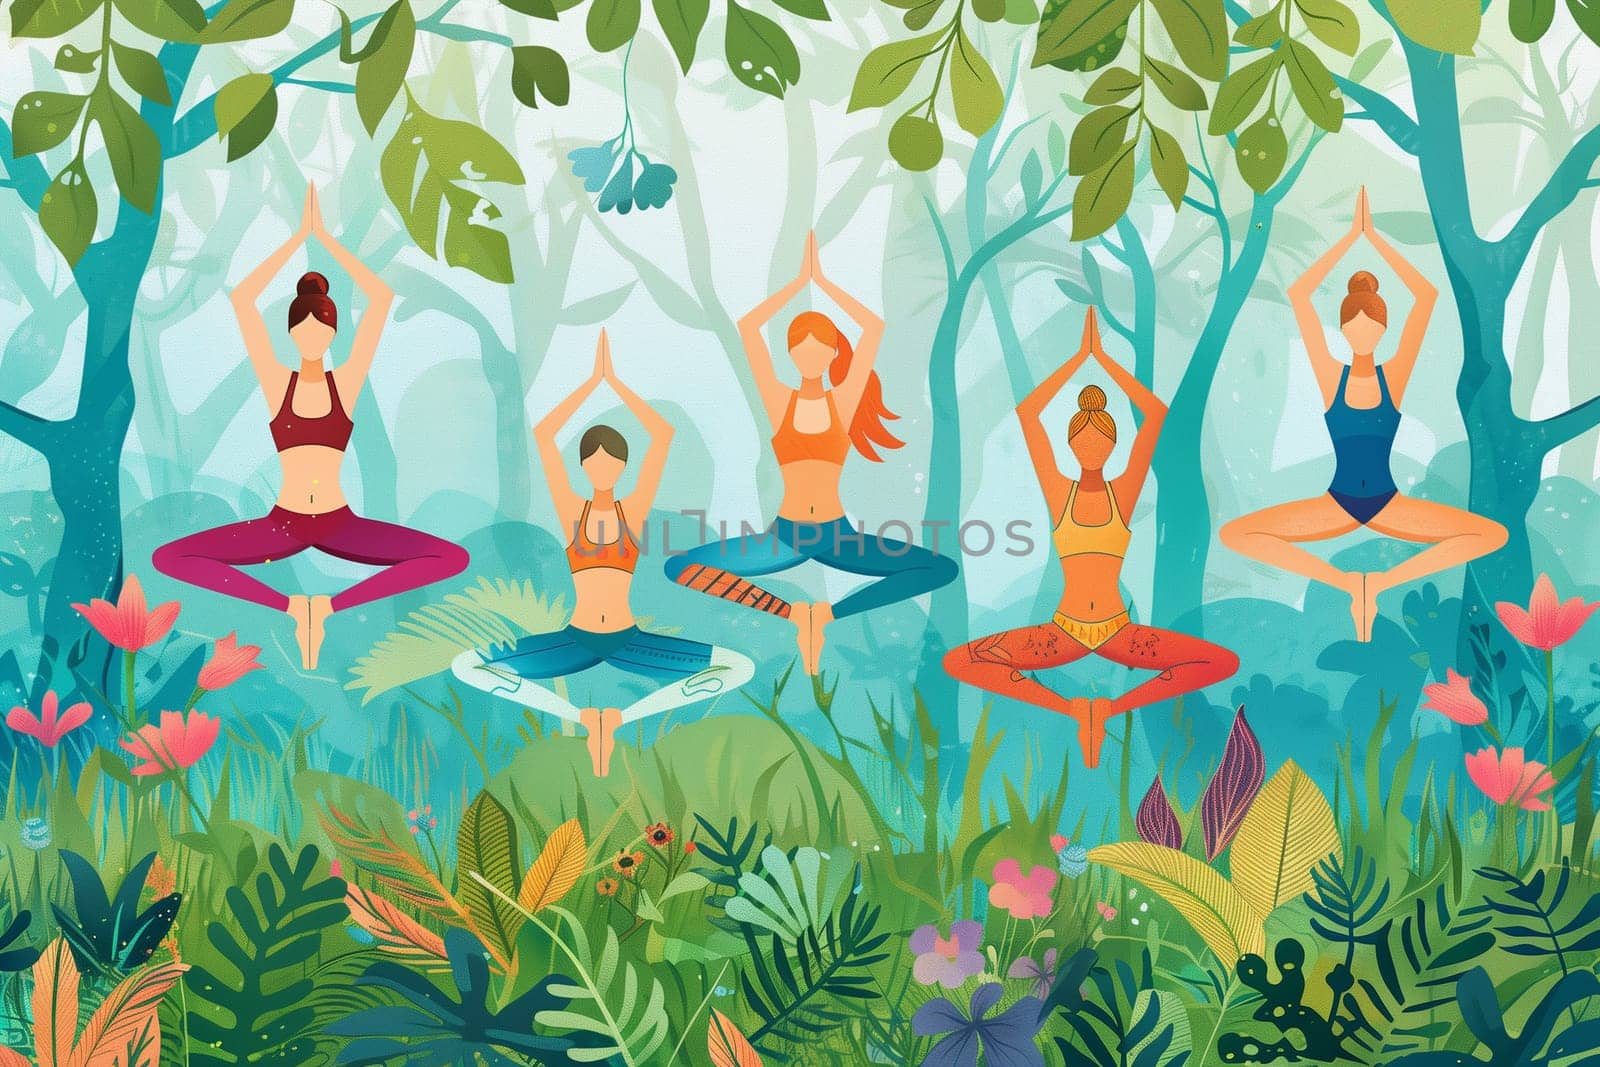 Multiple women are engaged in various yoga poses amidst the trees in a forest setting.